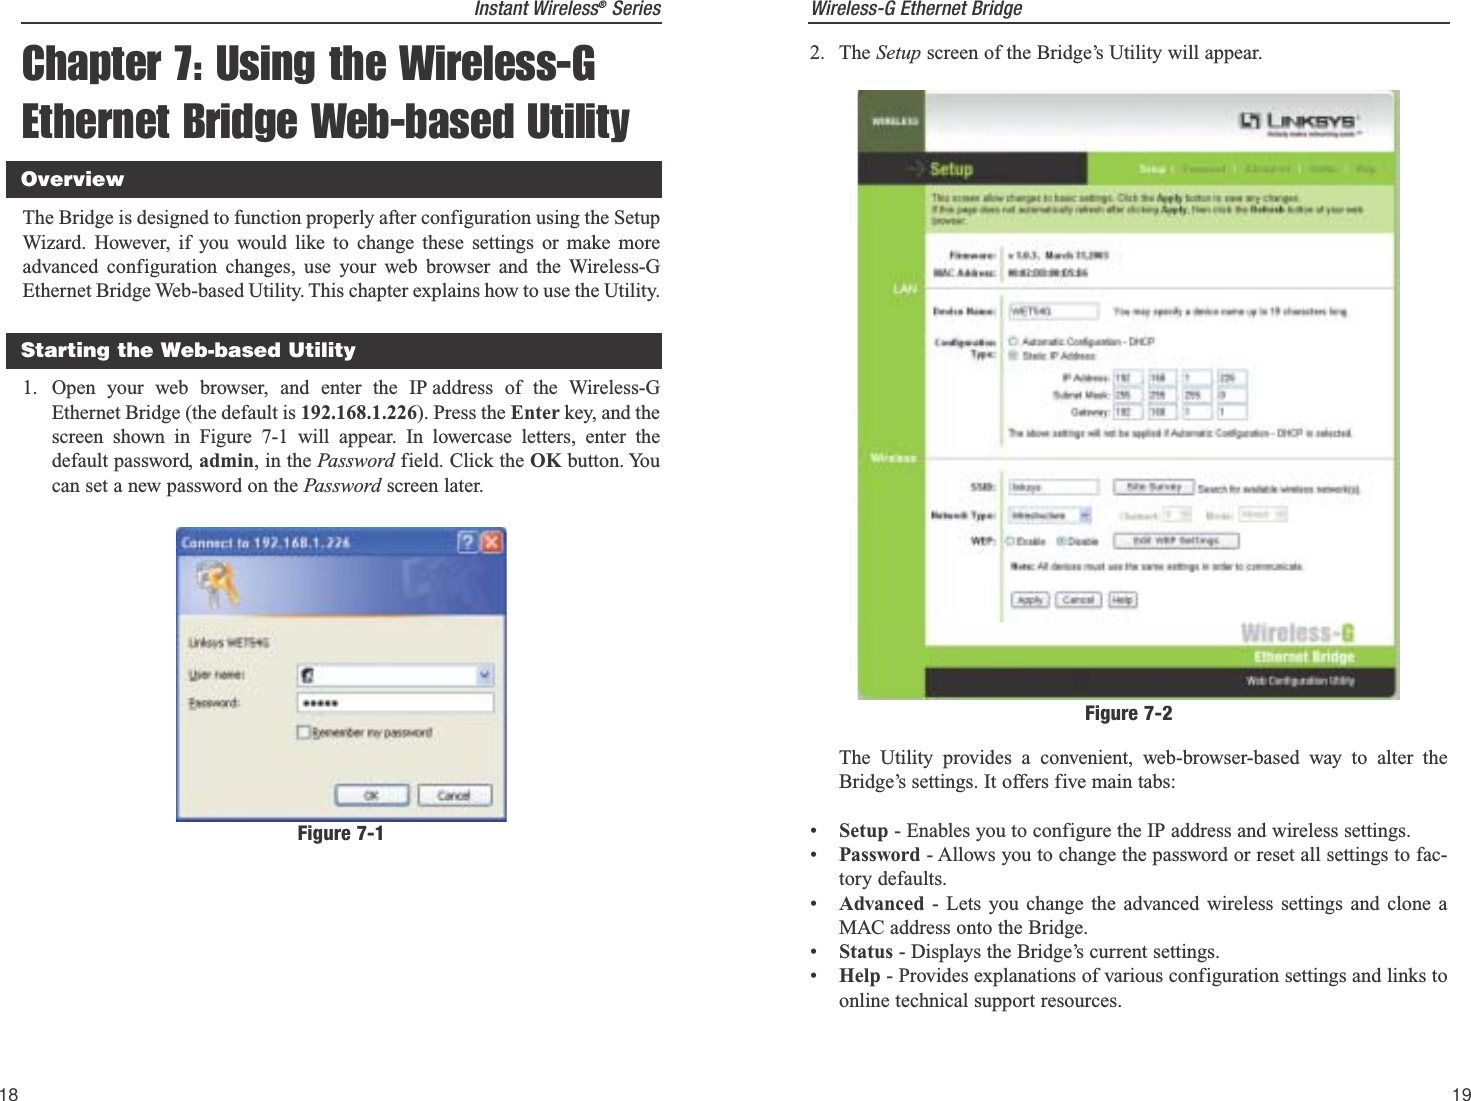 Wireless-G Ethernet Bridge19Instant Wireless®SeriesChapter 7: Using the Wireless-GEthernet Bridge Web-based UtilityThe Bridge is designed to function properly after configuration using the SetupWizard. However, if you would like to change these settings or make moreadvanced configuration changes, use your web browser and the Wireless-GEthernet Bridge Web-based Utility. This chapter explains how to use the Utility.1. Open your web browser, and enter the IP address of the Wireless-GEthernet Bridge (the default is 192.168.1.226). Press the Enter key, and thescreen shown in Figure 7-1 will appear. In lowercase letters, enter thedefault password, admin, in the Password field. Click the OK button. Youcan set a new password on the Password screen later. 182. The Setup screen of the Bridge’s Utility will appear. The Utility provides a convenient, web-browser-based way to alter theBridge’s settings. It offers five main tabs:•Setup - Enables you to configure the IP address and wireless settings.•Password - Allows you to change the password or reset all settings to fac-tory defaults.•Advanced - Lets you change the advanced wireless settings and clone aMAC address onto the Bridge.•Status - Displays the Bridge’s current settings.•Help - Provides explanations of various configuration settings and links toonline technical support resources.Figure 7-2Starting the Web-based UtilityOverviewFigure 7-1